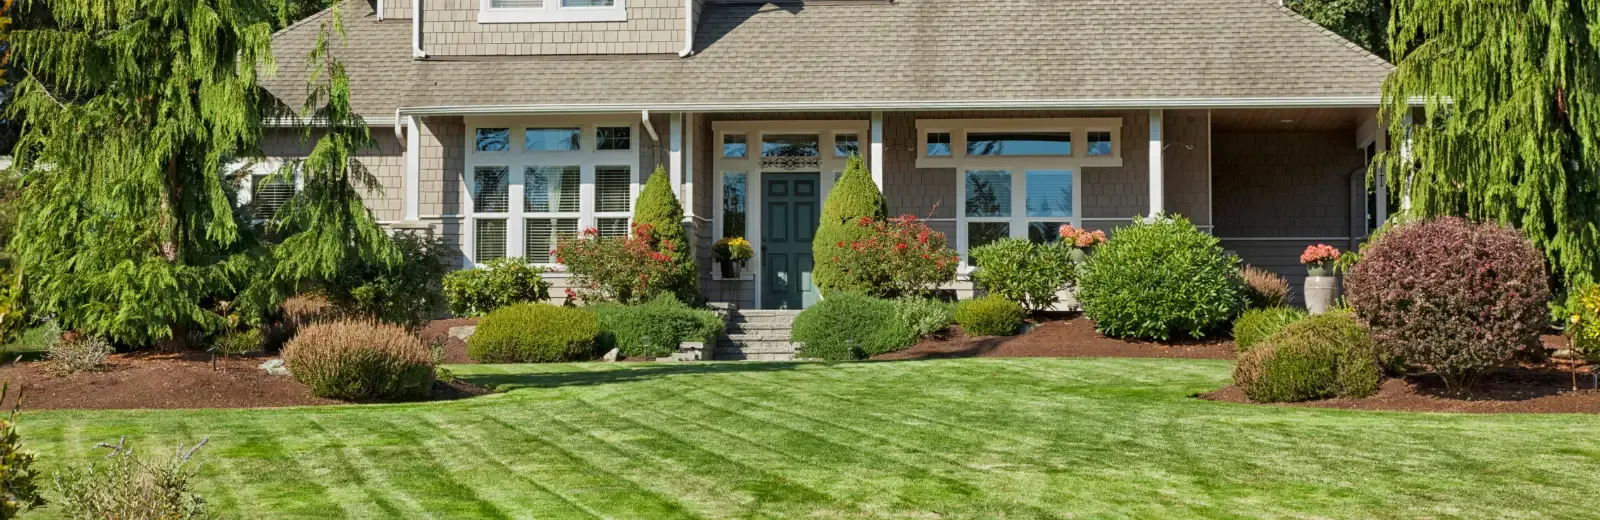 Nice home with green healthy front lawn